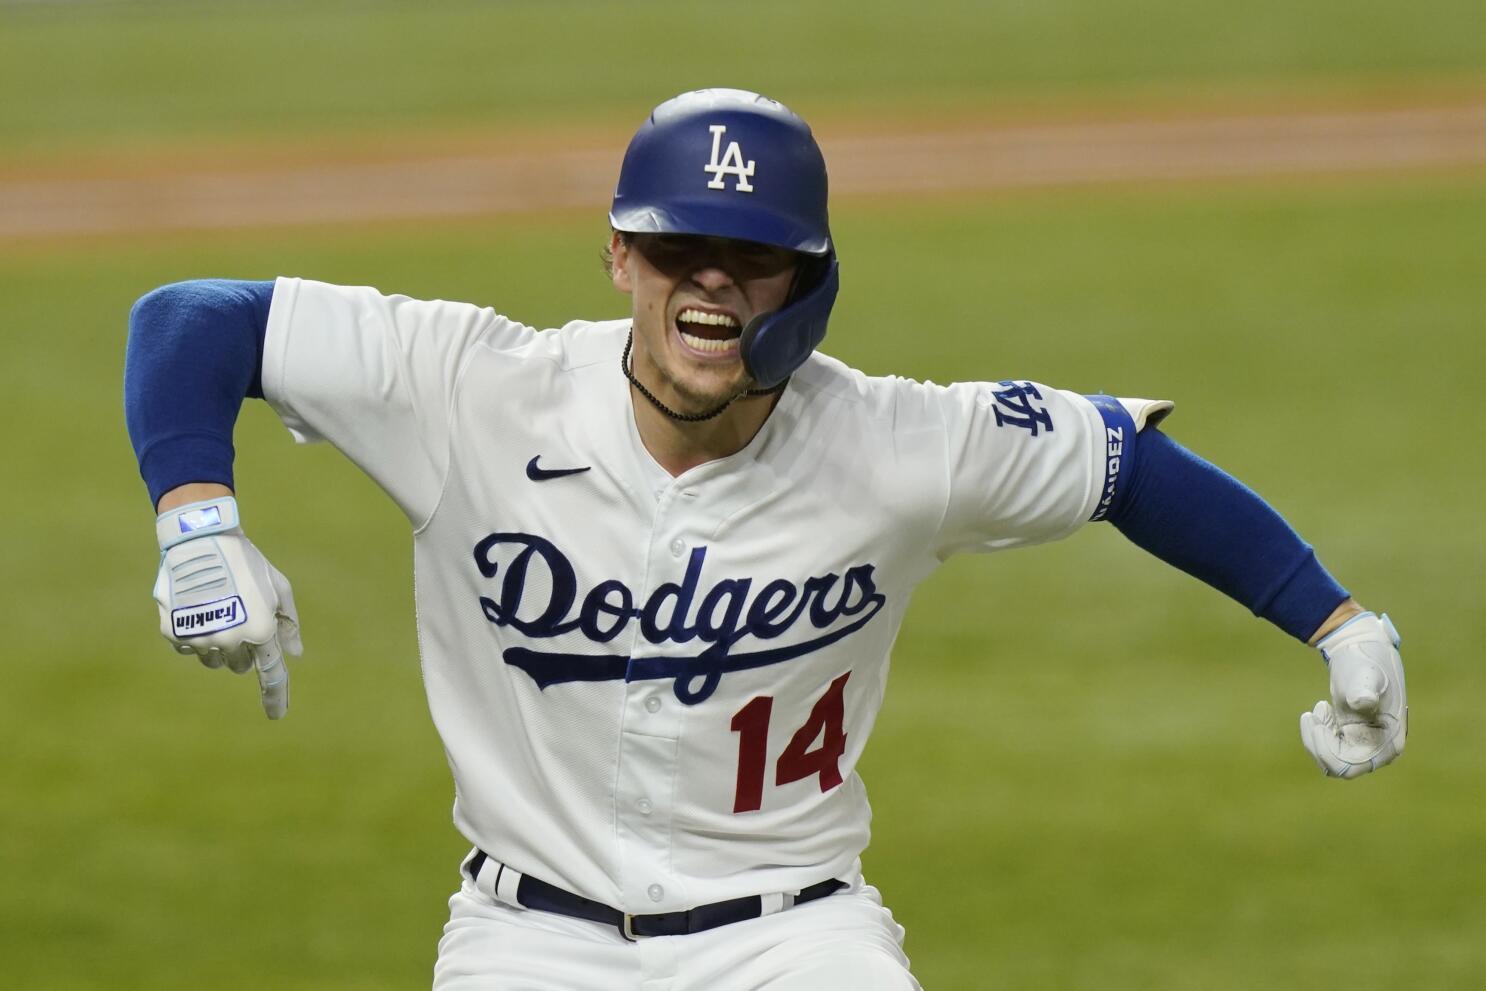 Dodgers bringing back Kiké Hernández in trade with Red Sox - Los